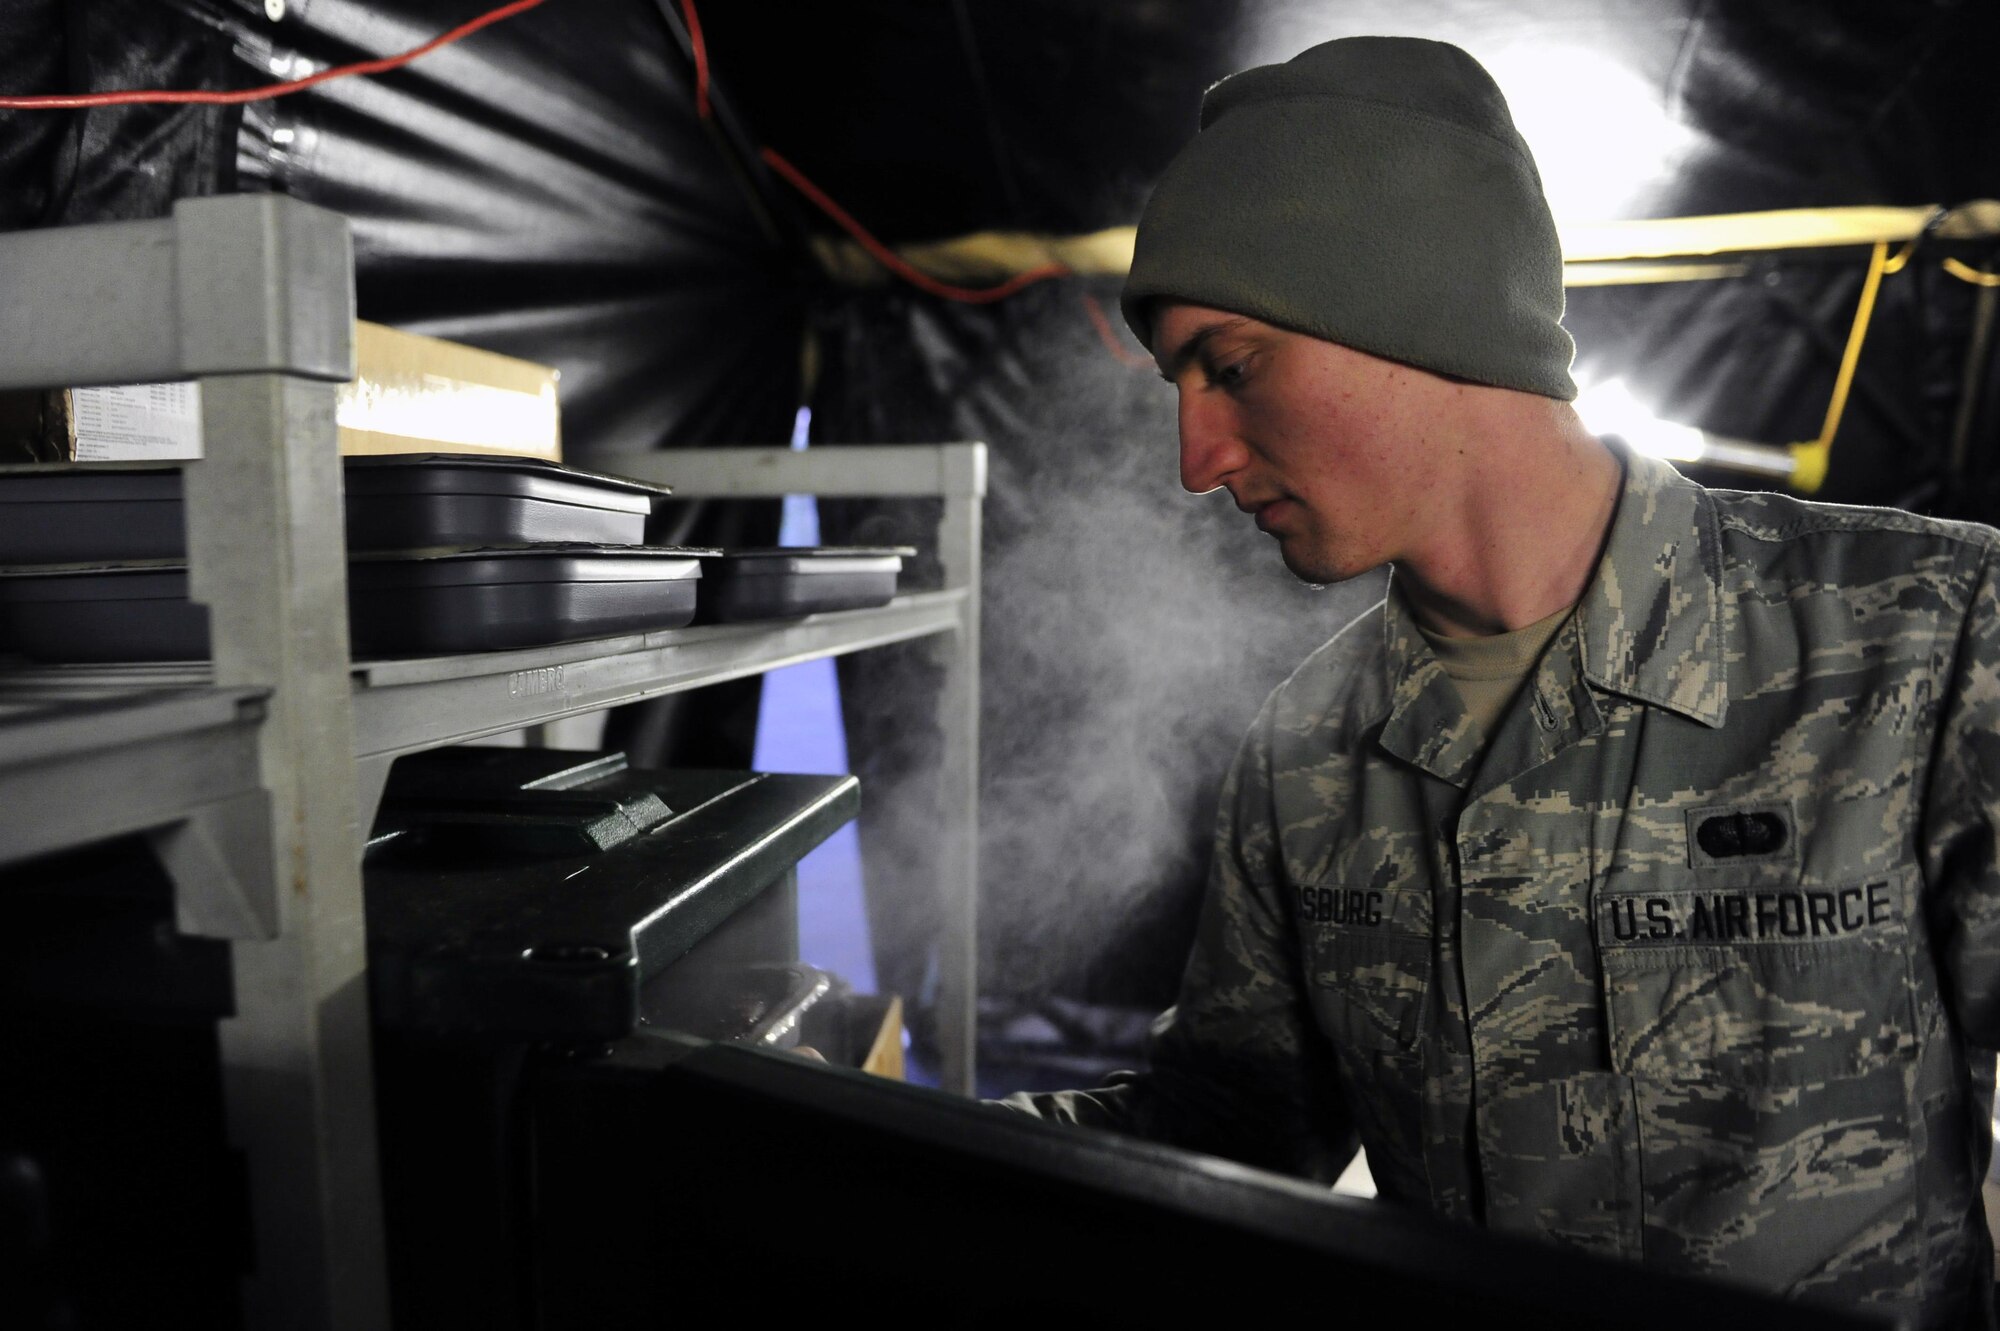 Airman 1st Class Richard Vosburg, fitness specialist with the 1st Special Operations Force Support Squadron, places food into a heated container during exercise Frigid Archer 2016 at Eglin Range, Fla., Jan. 7, 2016. Members of FSS are trained int multiple specialties including fitness, cooking and mortuary affairs. Frigid Archer tested 1st Special Operations Wing Air Commandos’ expertise through a myriad of operational and support requirements. (U.S. Air Force photo by Staff Sgt. Tyler Placie)